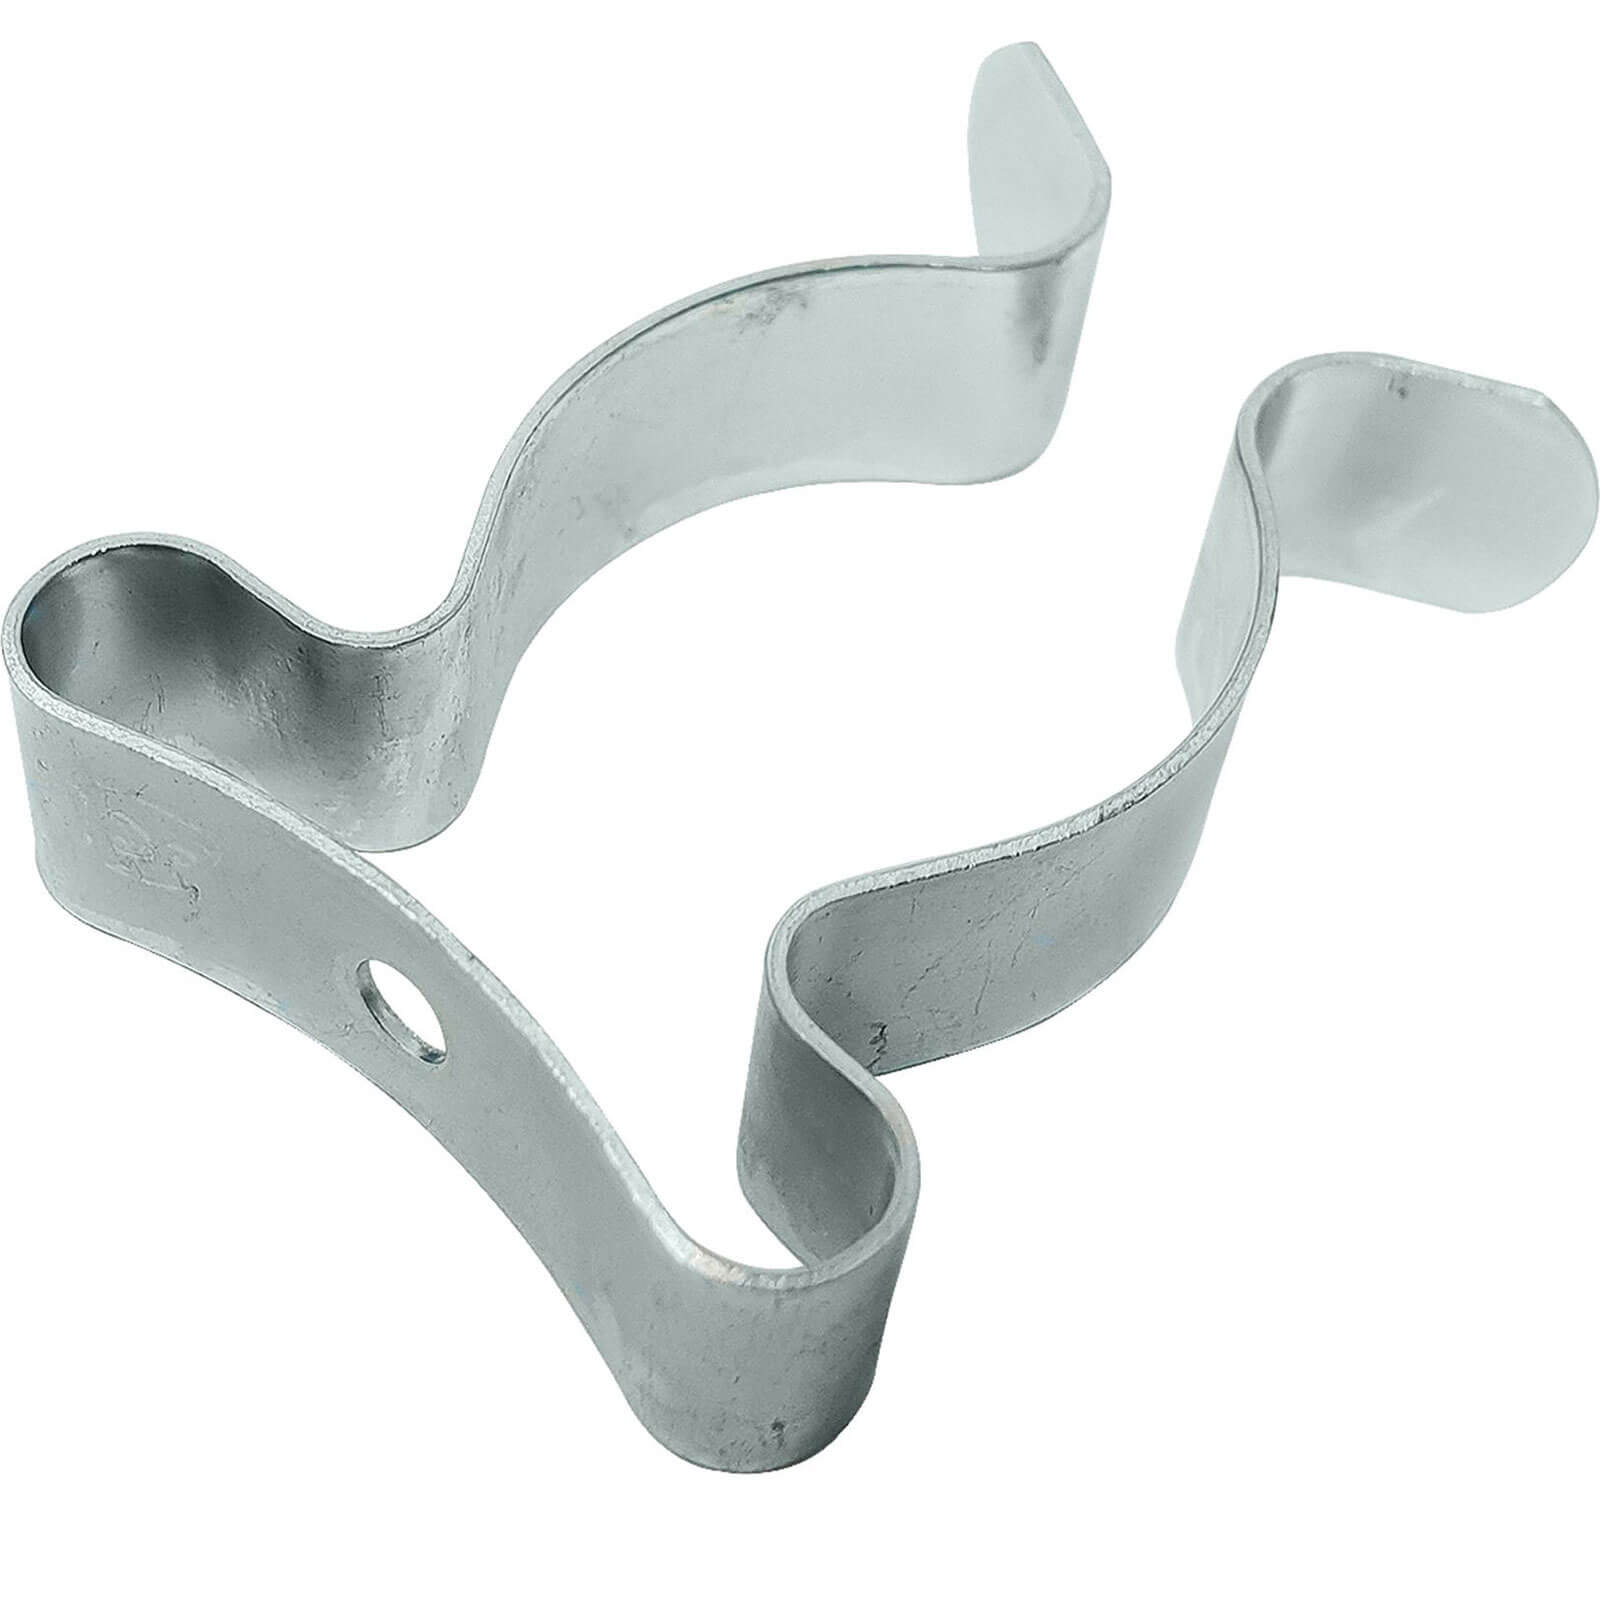 Image of Forgefix Zinc Plated Tool Clips 25mm Pack of 25